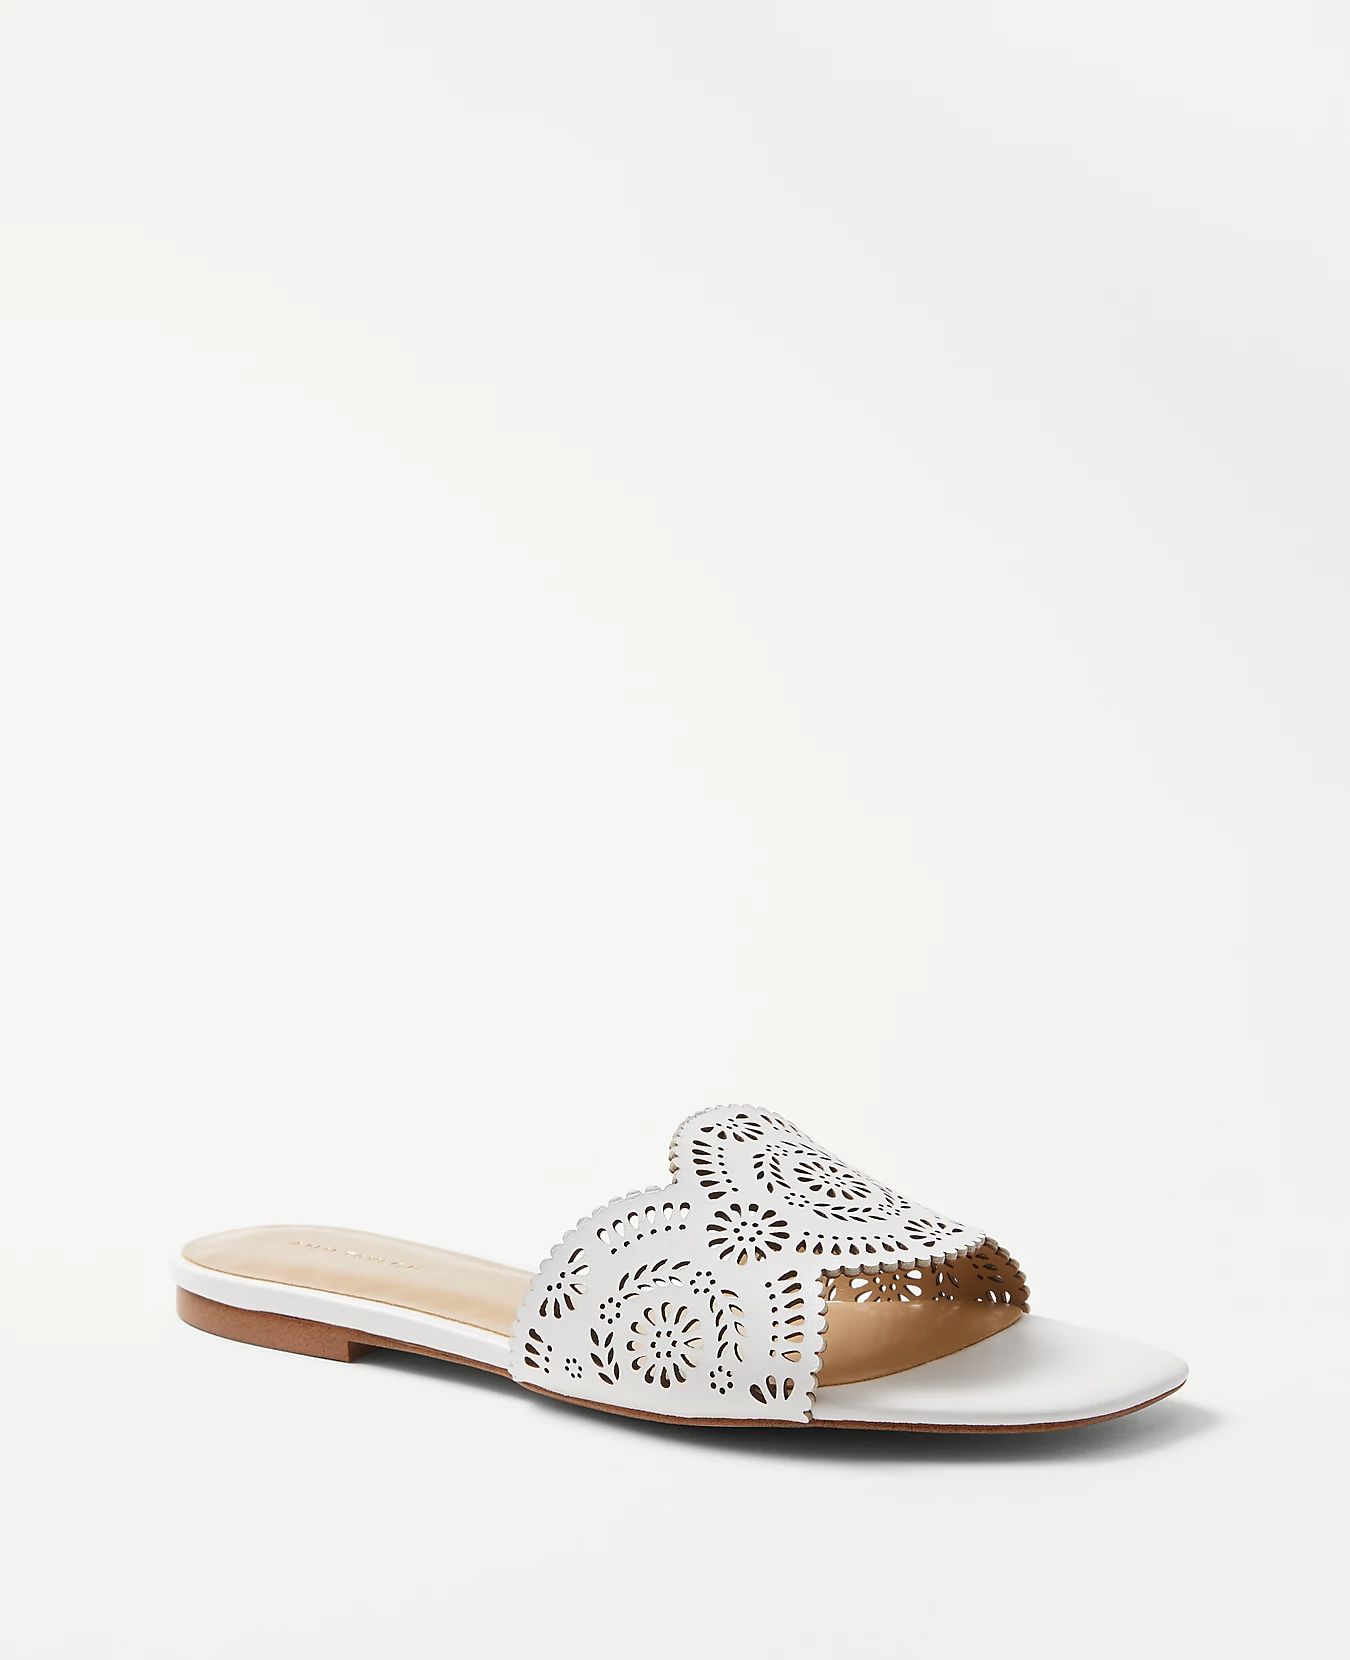 Eyelet Perforated Leather Slide Sandals | Ann Taylor | Ann Taylor (US)